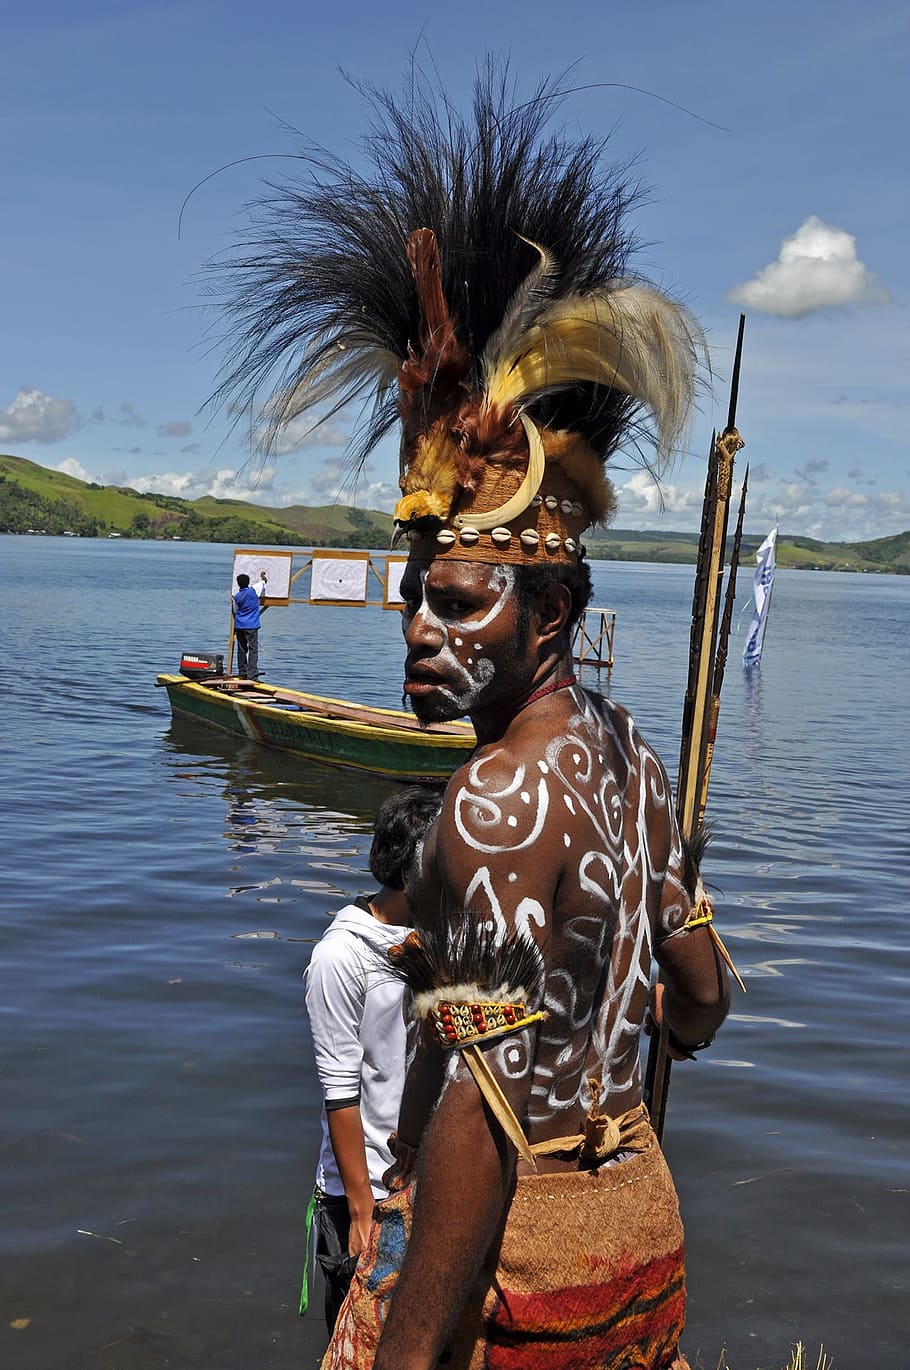 papua, west burat, boogschietfestival, people, real people, water, day, sky, lifestyles, women